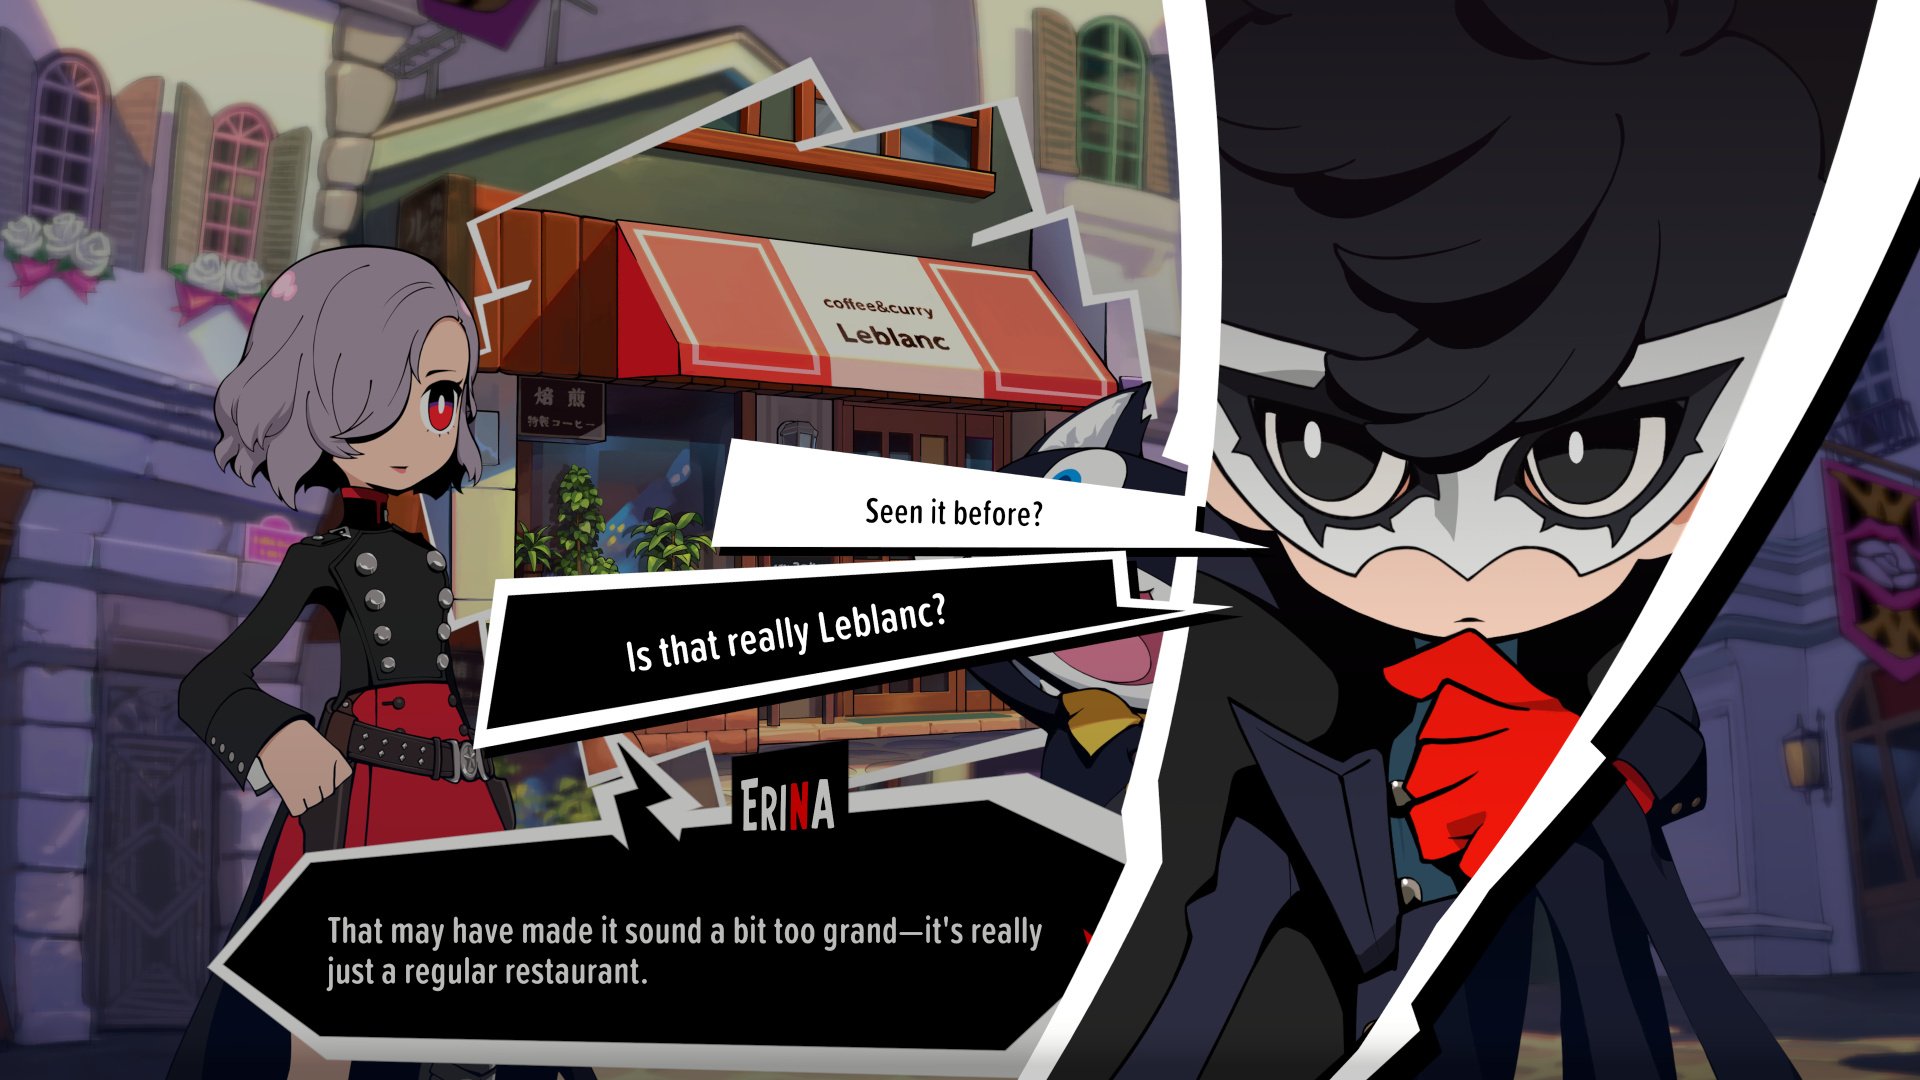 Game Pass Tracker on X: Persona 5 Tactica Review Round Up: Nintendo Life -  9/10 Pure Xbox - 8/10 IGN - 8/10 GamesRadar+ - 4/5 Windows Central - 4/5  Game Informer 